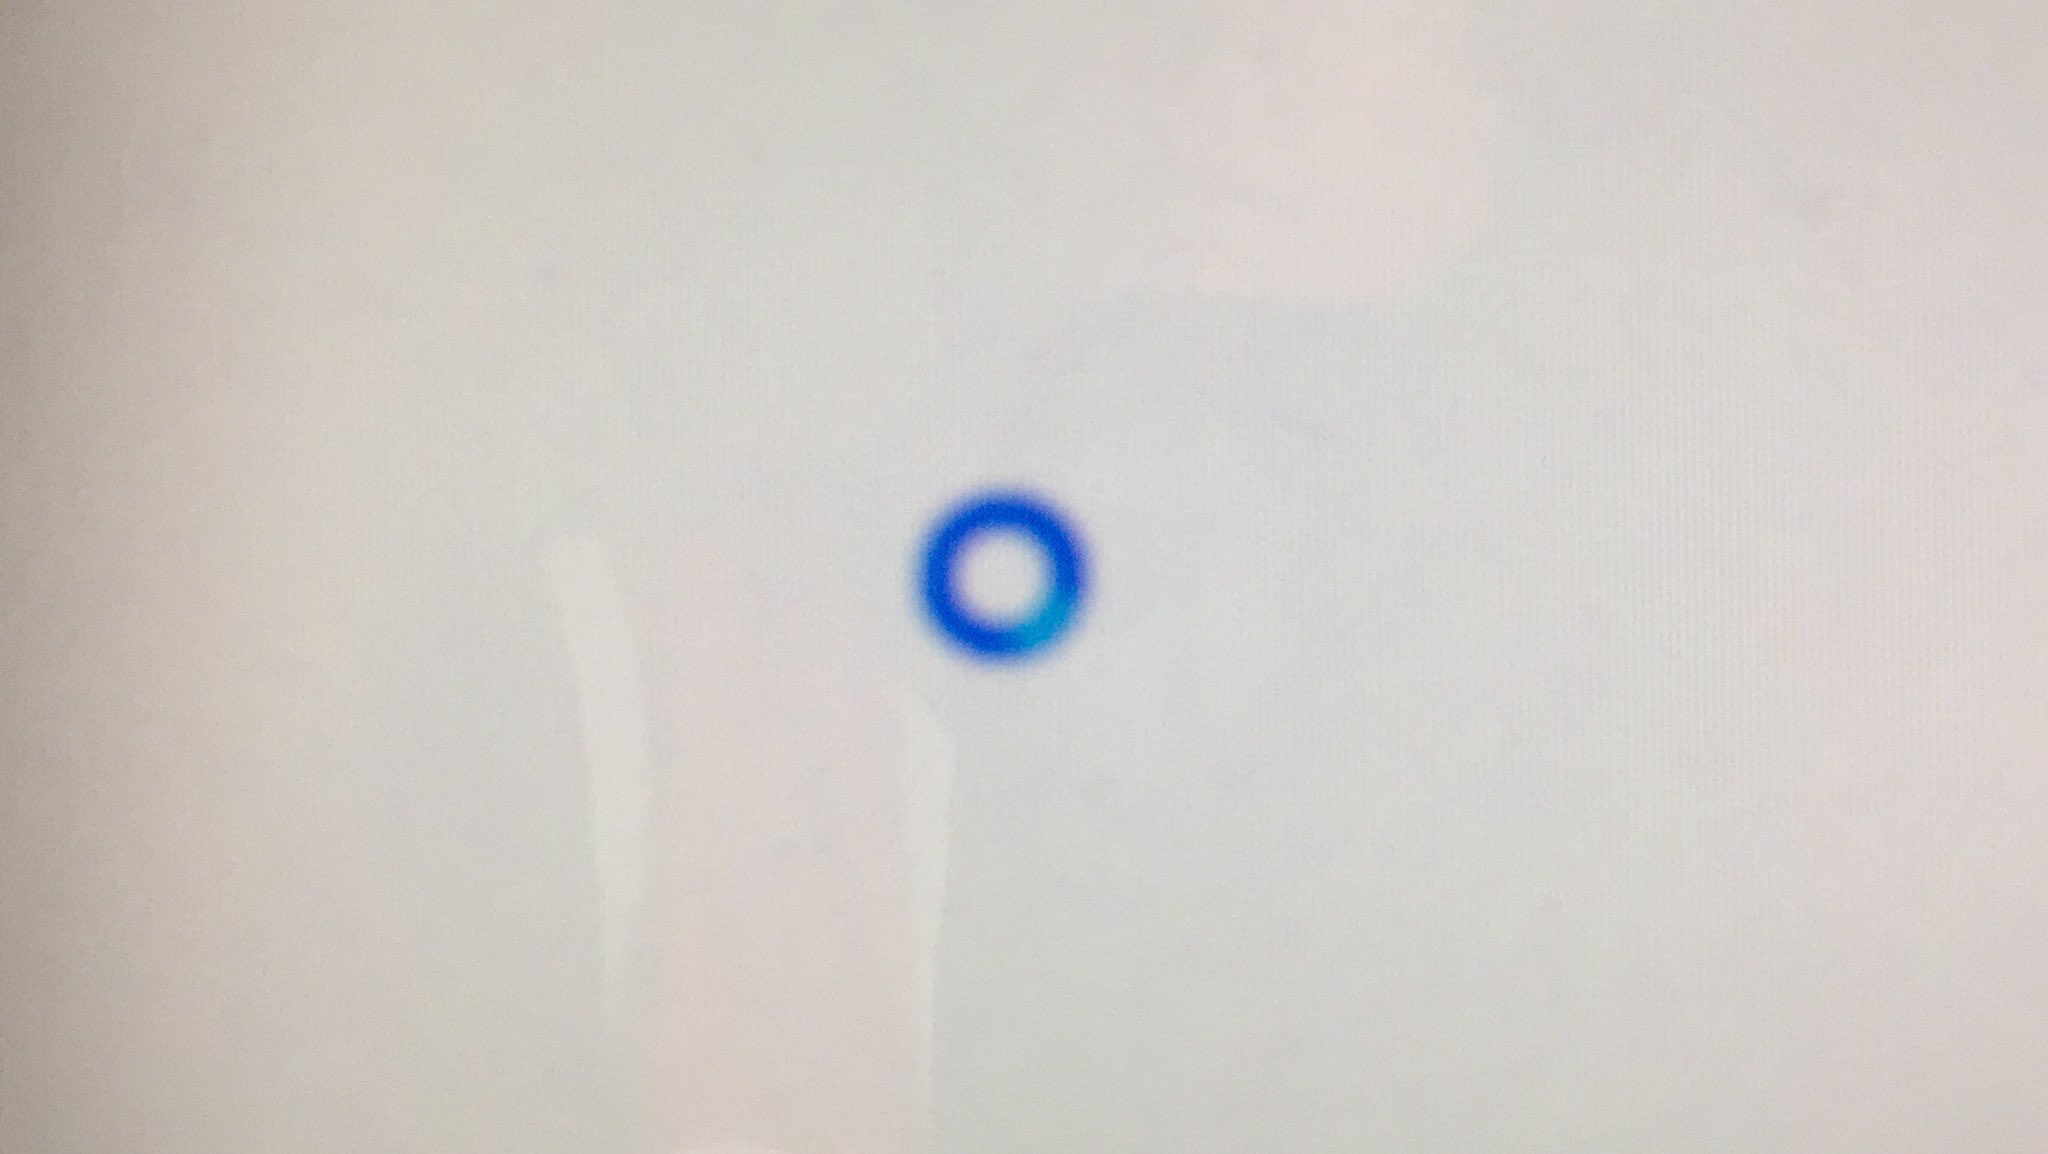 Jon Carr on Twitter: "If I see the little blue circle and the words “Not Responding” my computer screen again, I swear going out the - argh! #notresponding #